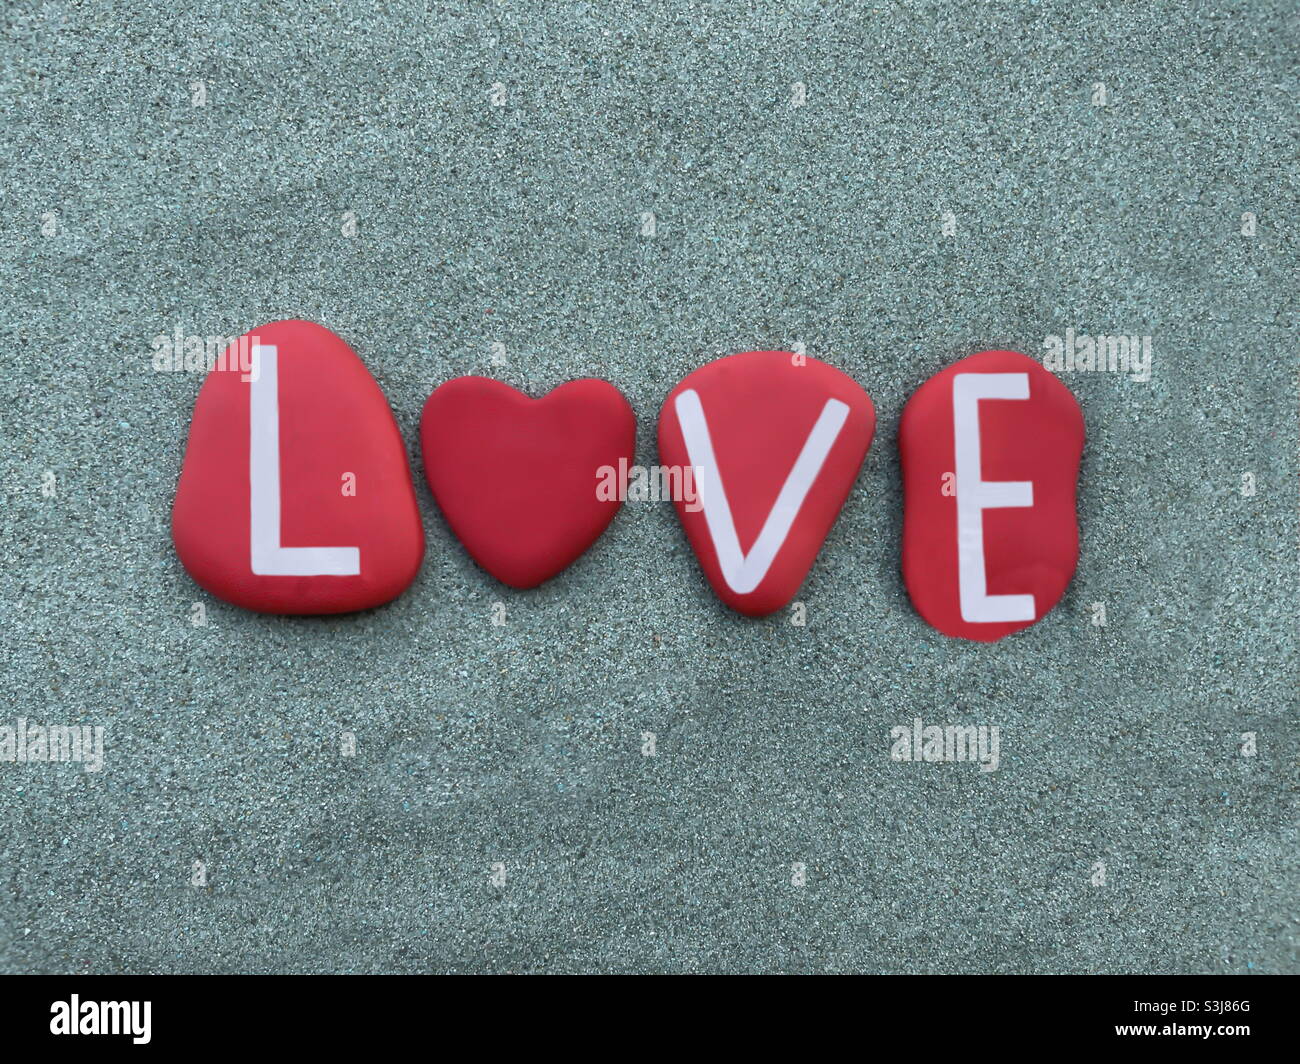 Love word composed with red colored stone letters and a red heart stone over green sand Stock Photo